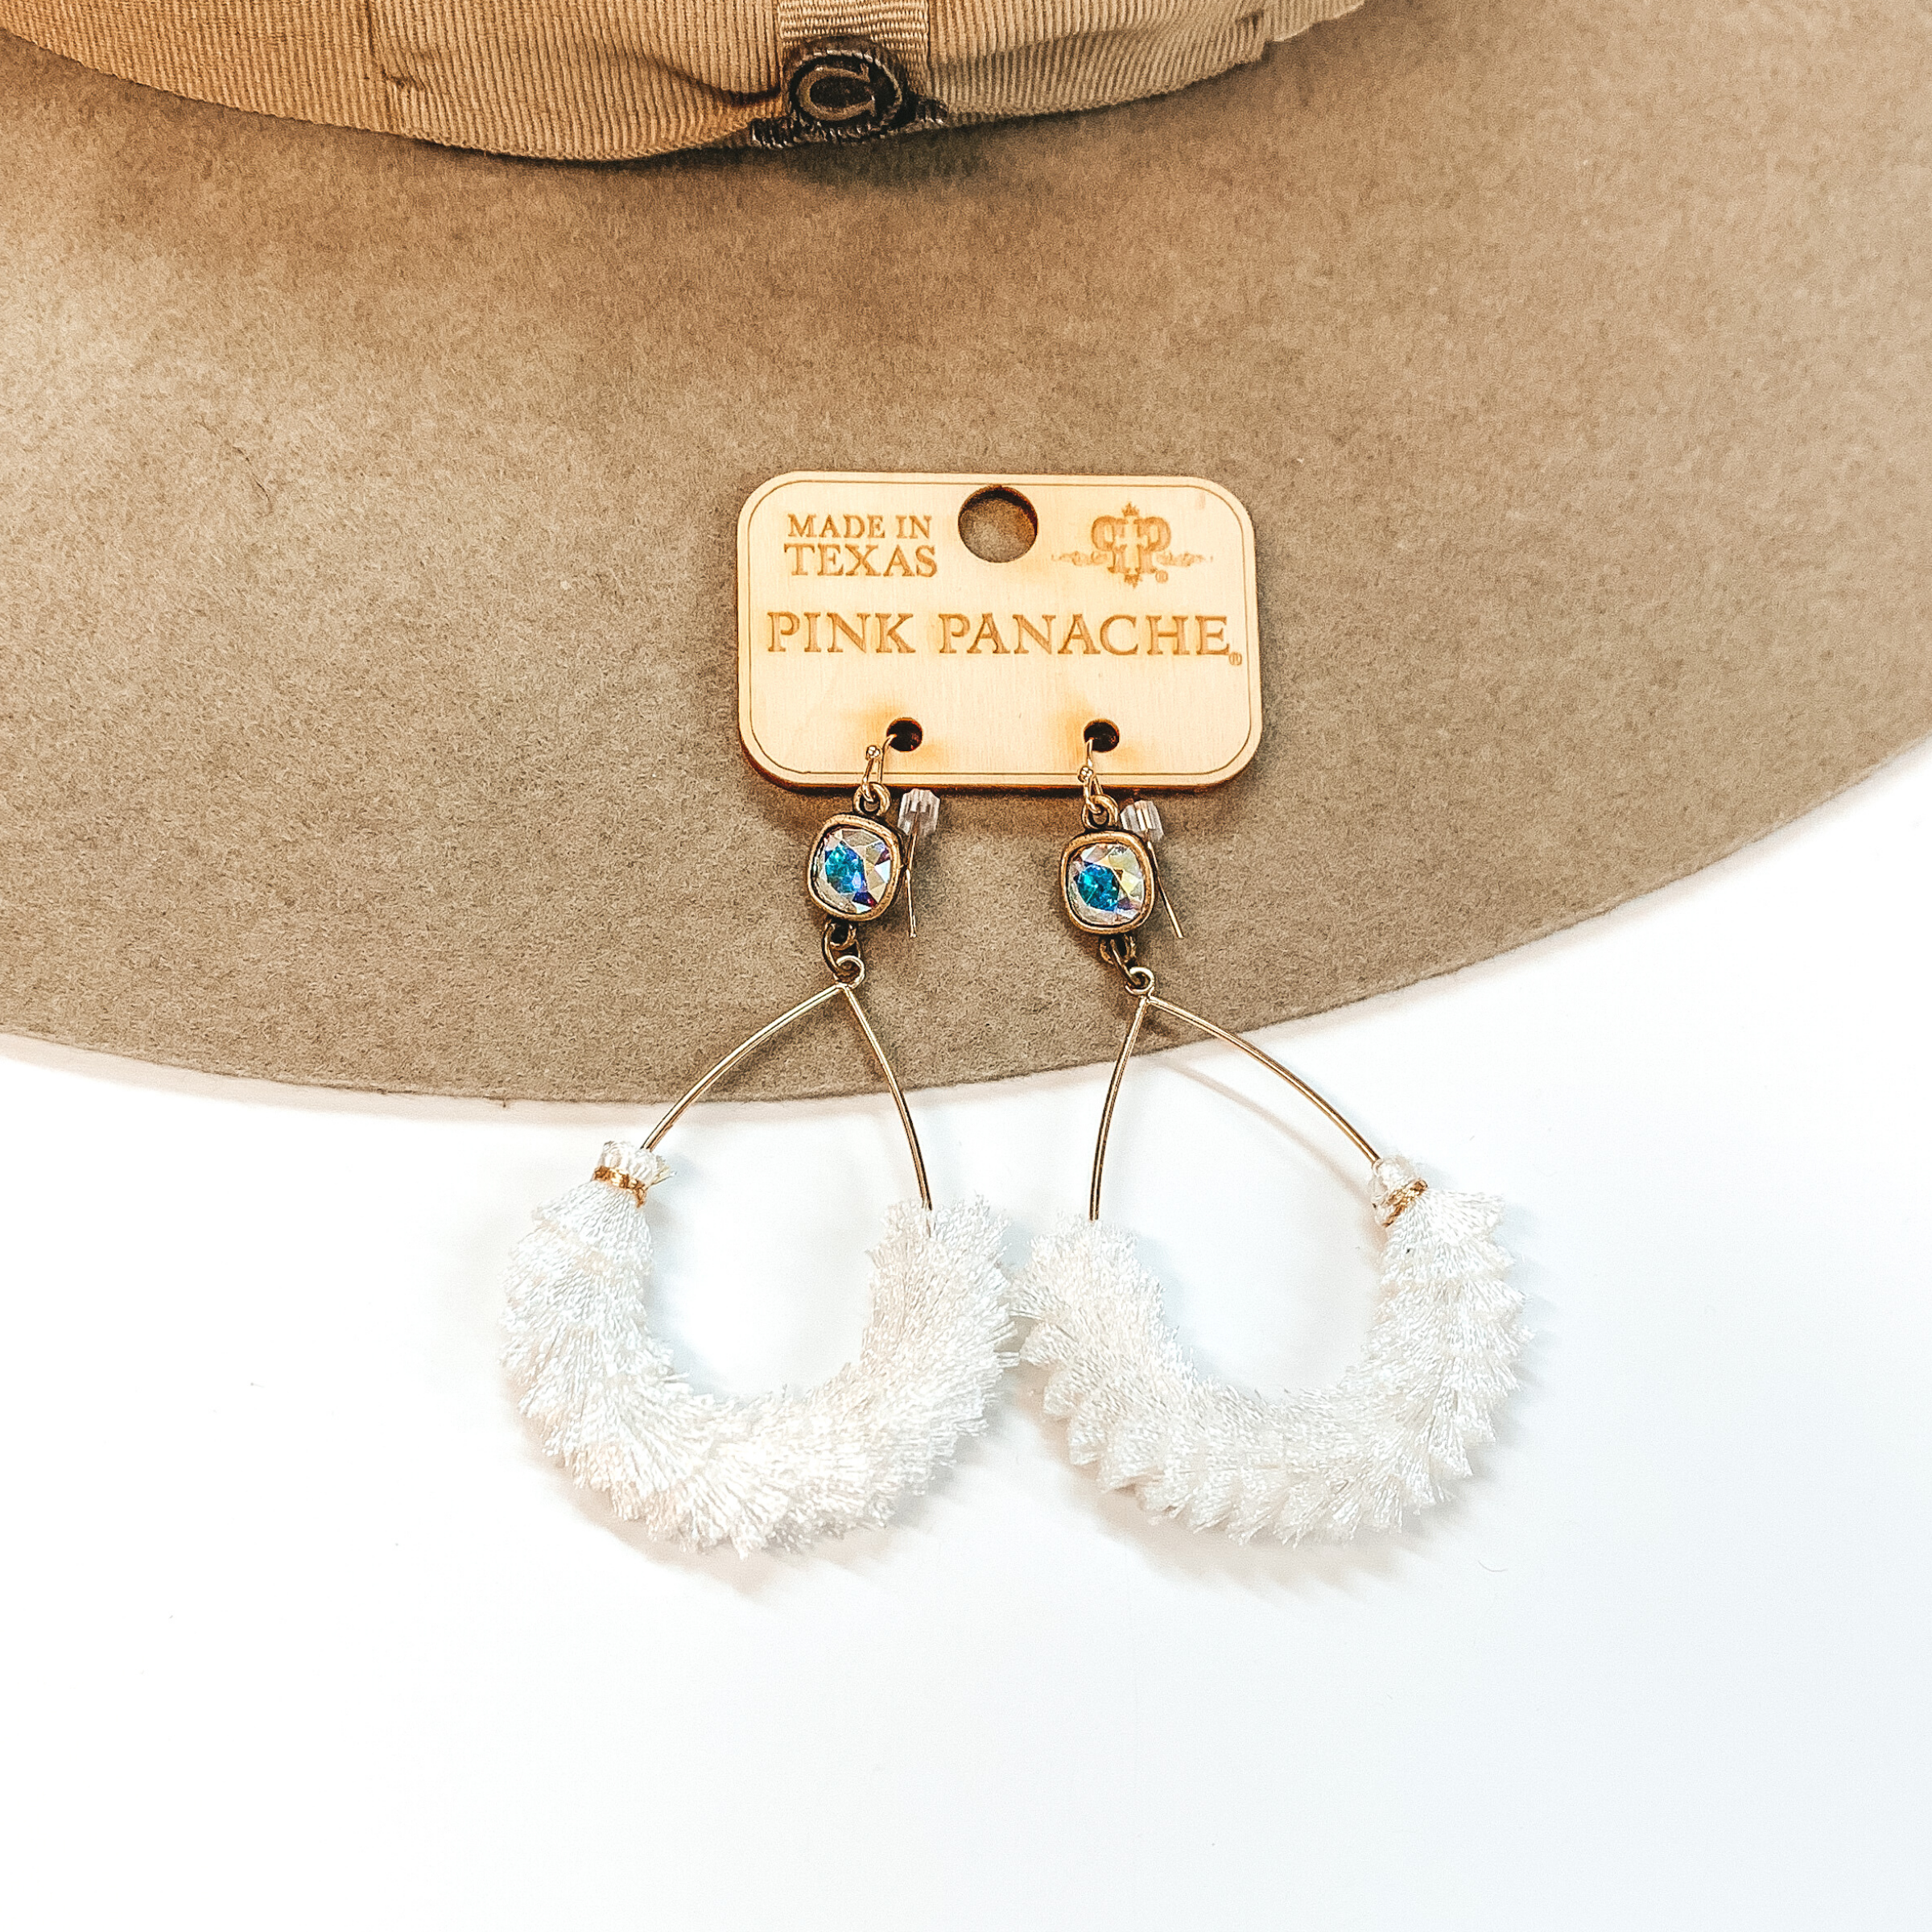 A pair of gold teardrop earrings with an AB cushion cut crystal and white fringe detailing. Pictured on white background with a beige hat.